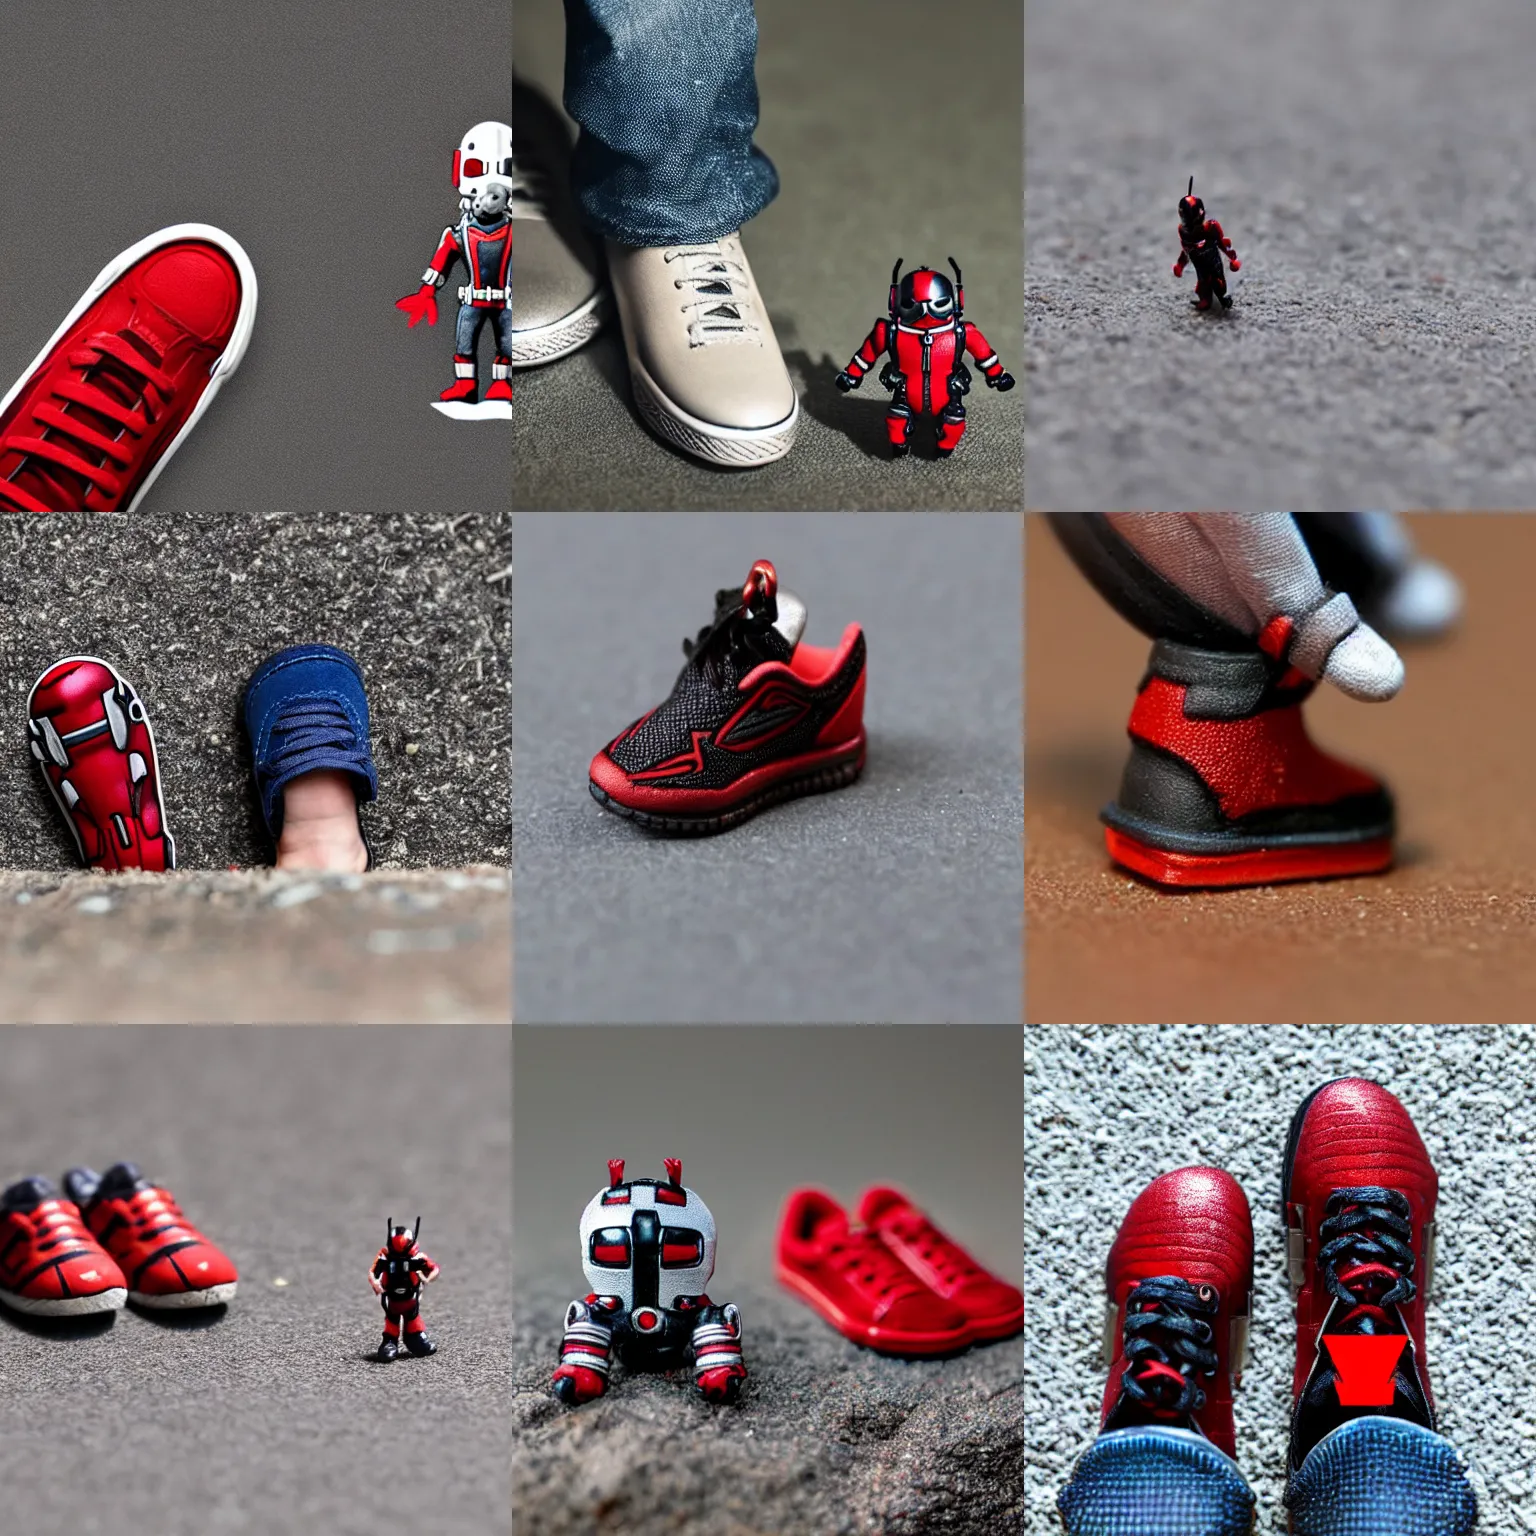 Prompt: A tiny miniature figure of Antman next to a sneaker